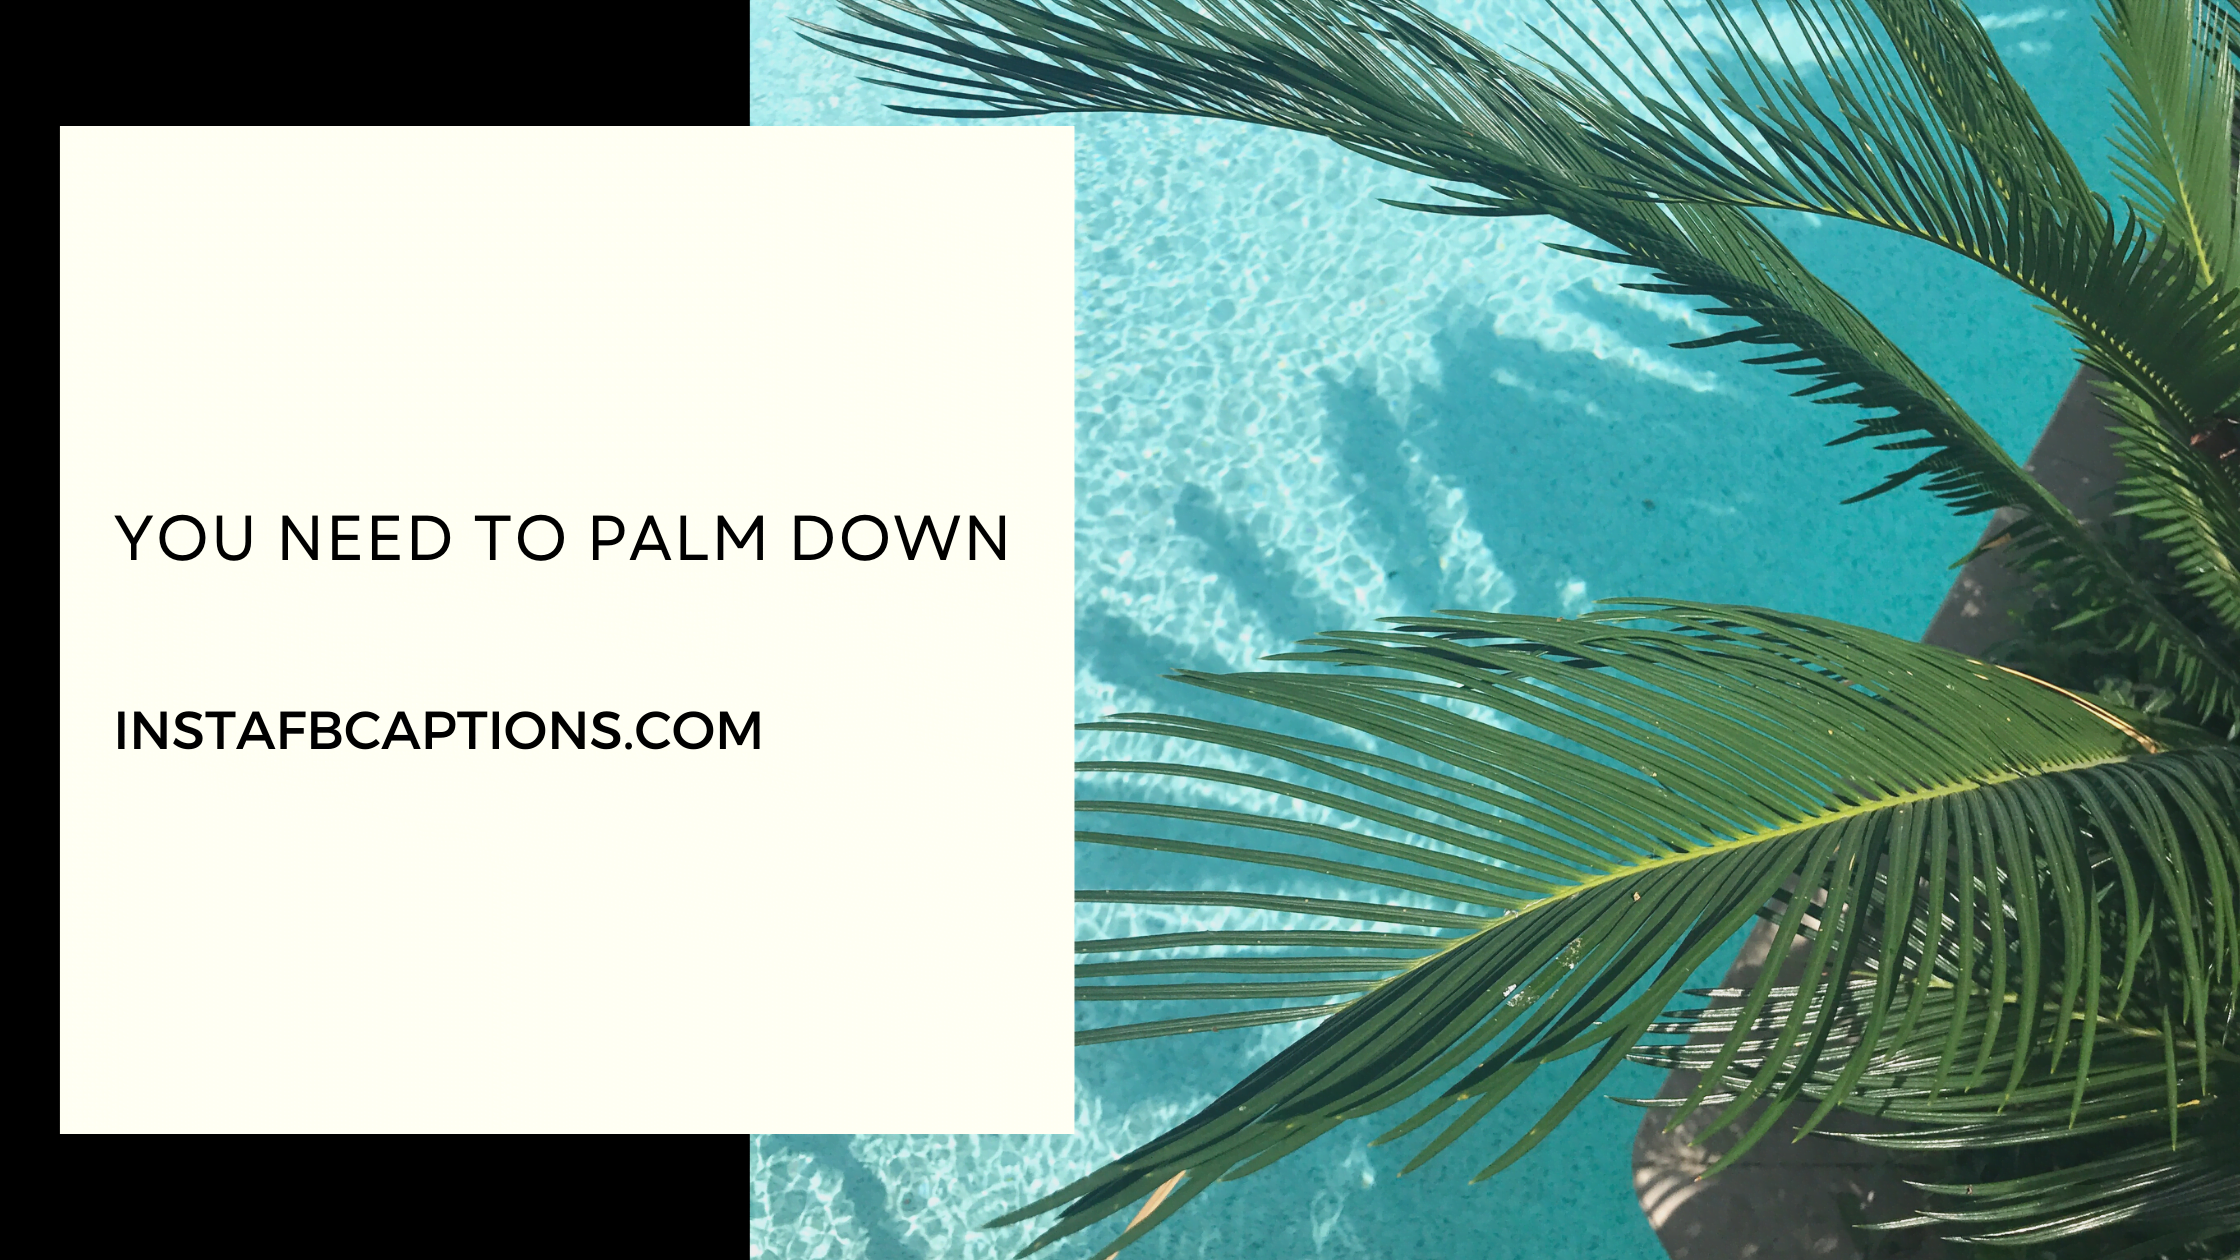 Amazing Palm Tree Puns  - Amazing Palm Tree Puns  - 97 Palm Tree Instagram Captions Quotes Hashtags in 2022